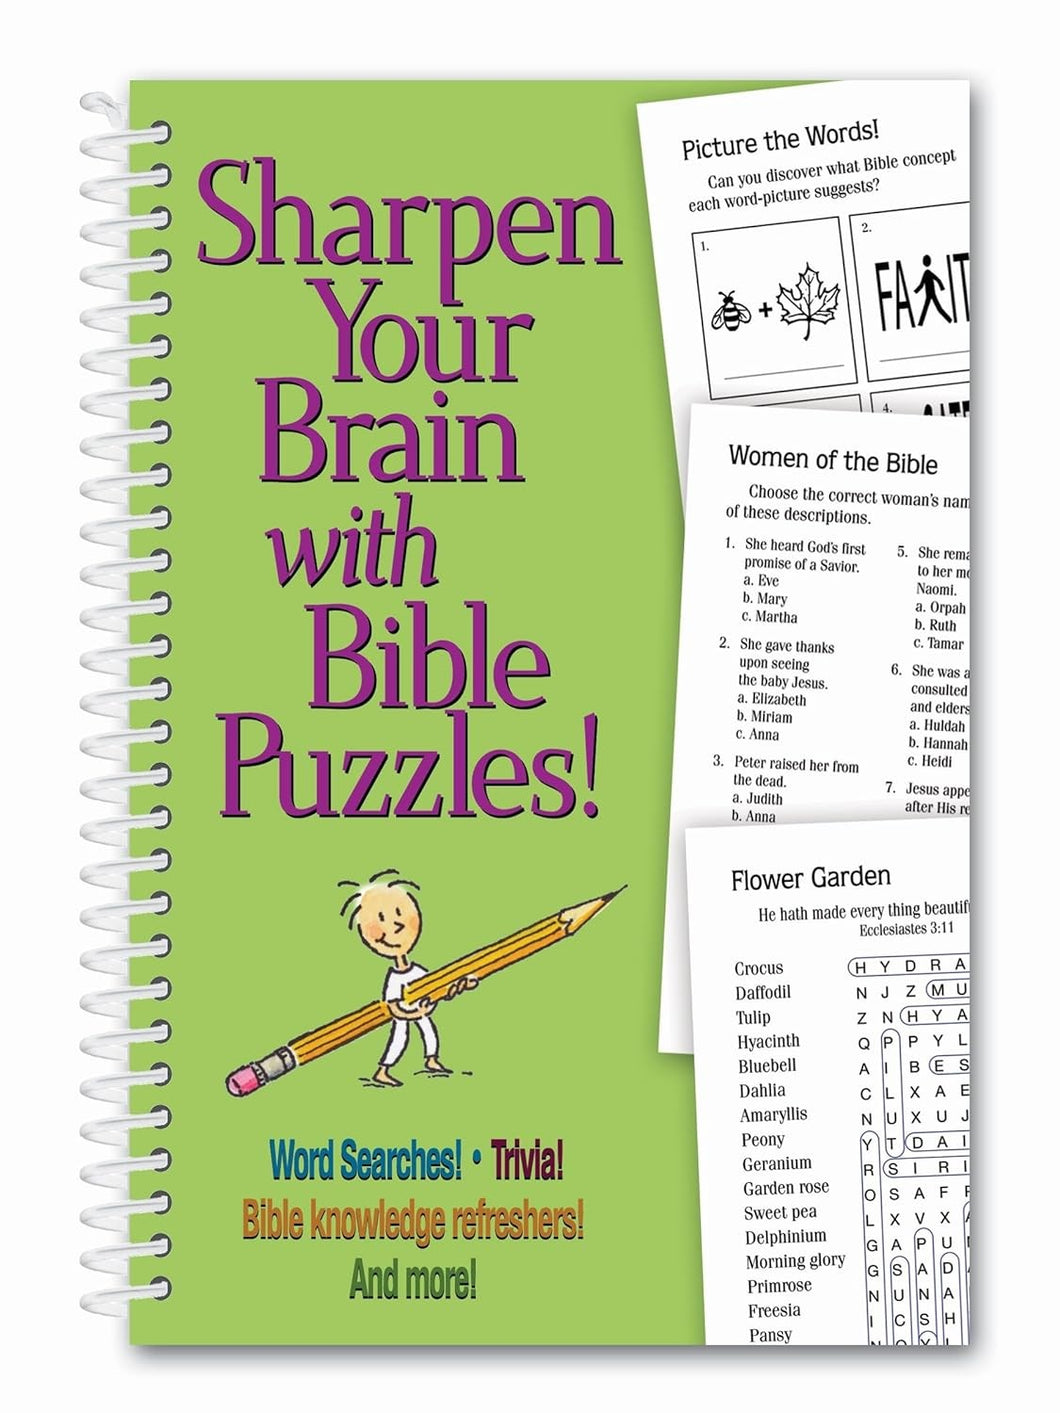 Sharpen Your Brain With Bible Puzzles!